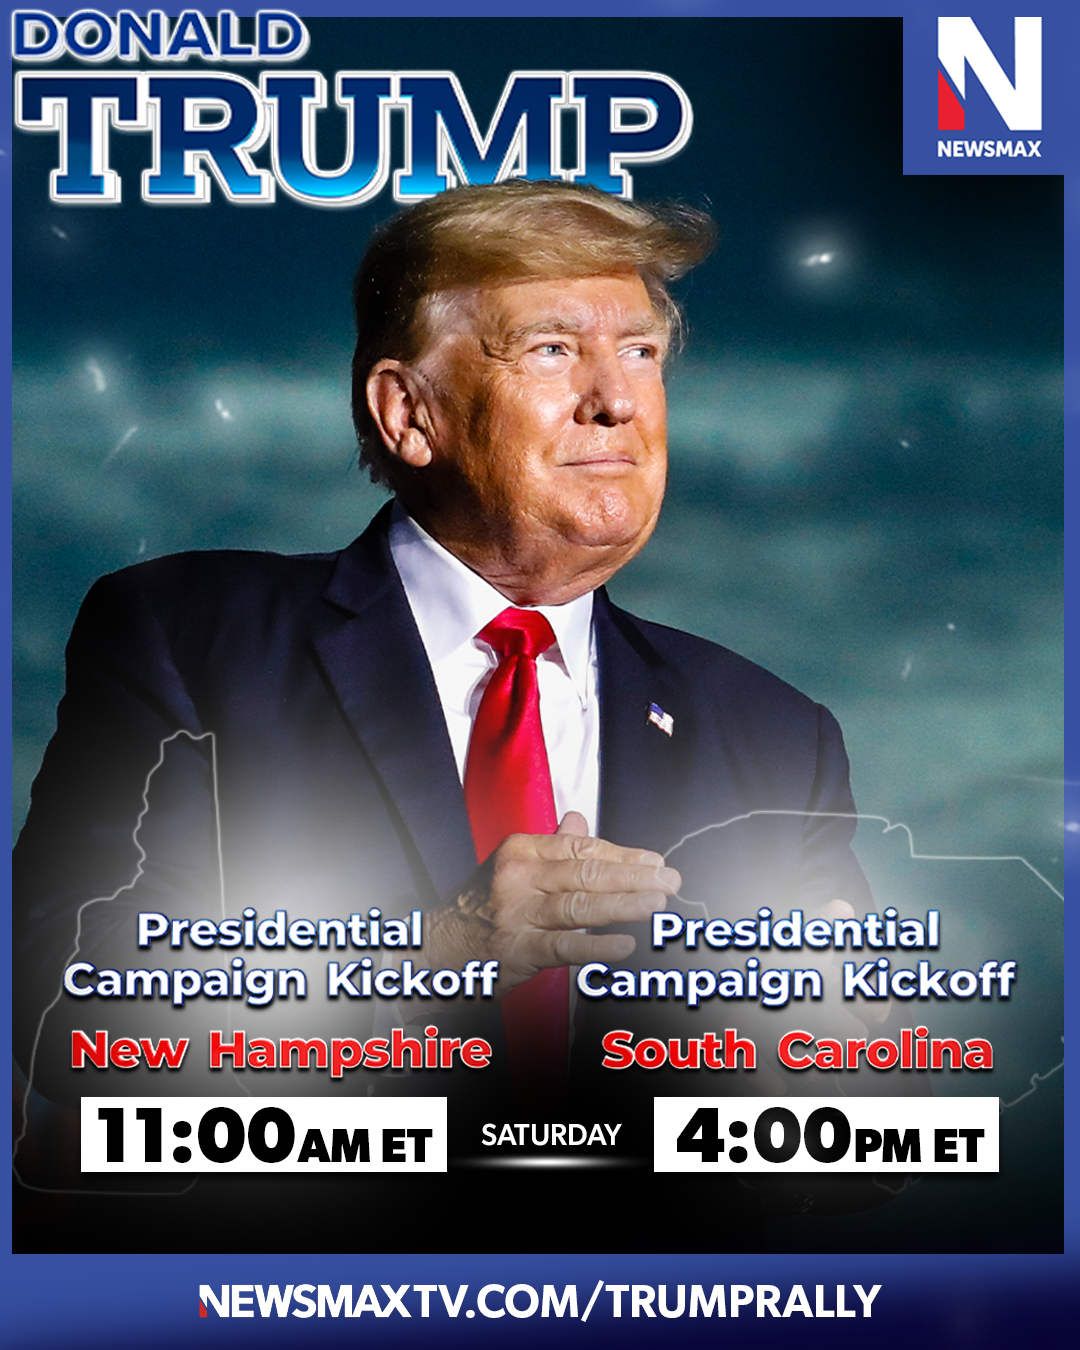 SECOND TRUMP RALLY SATURDAY ON NOW 5:44pm 0e3c7aa4cd182ca5